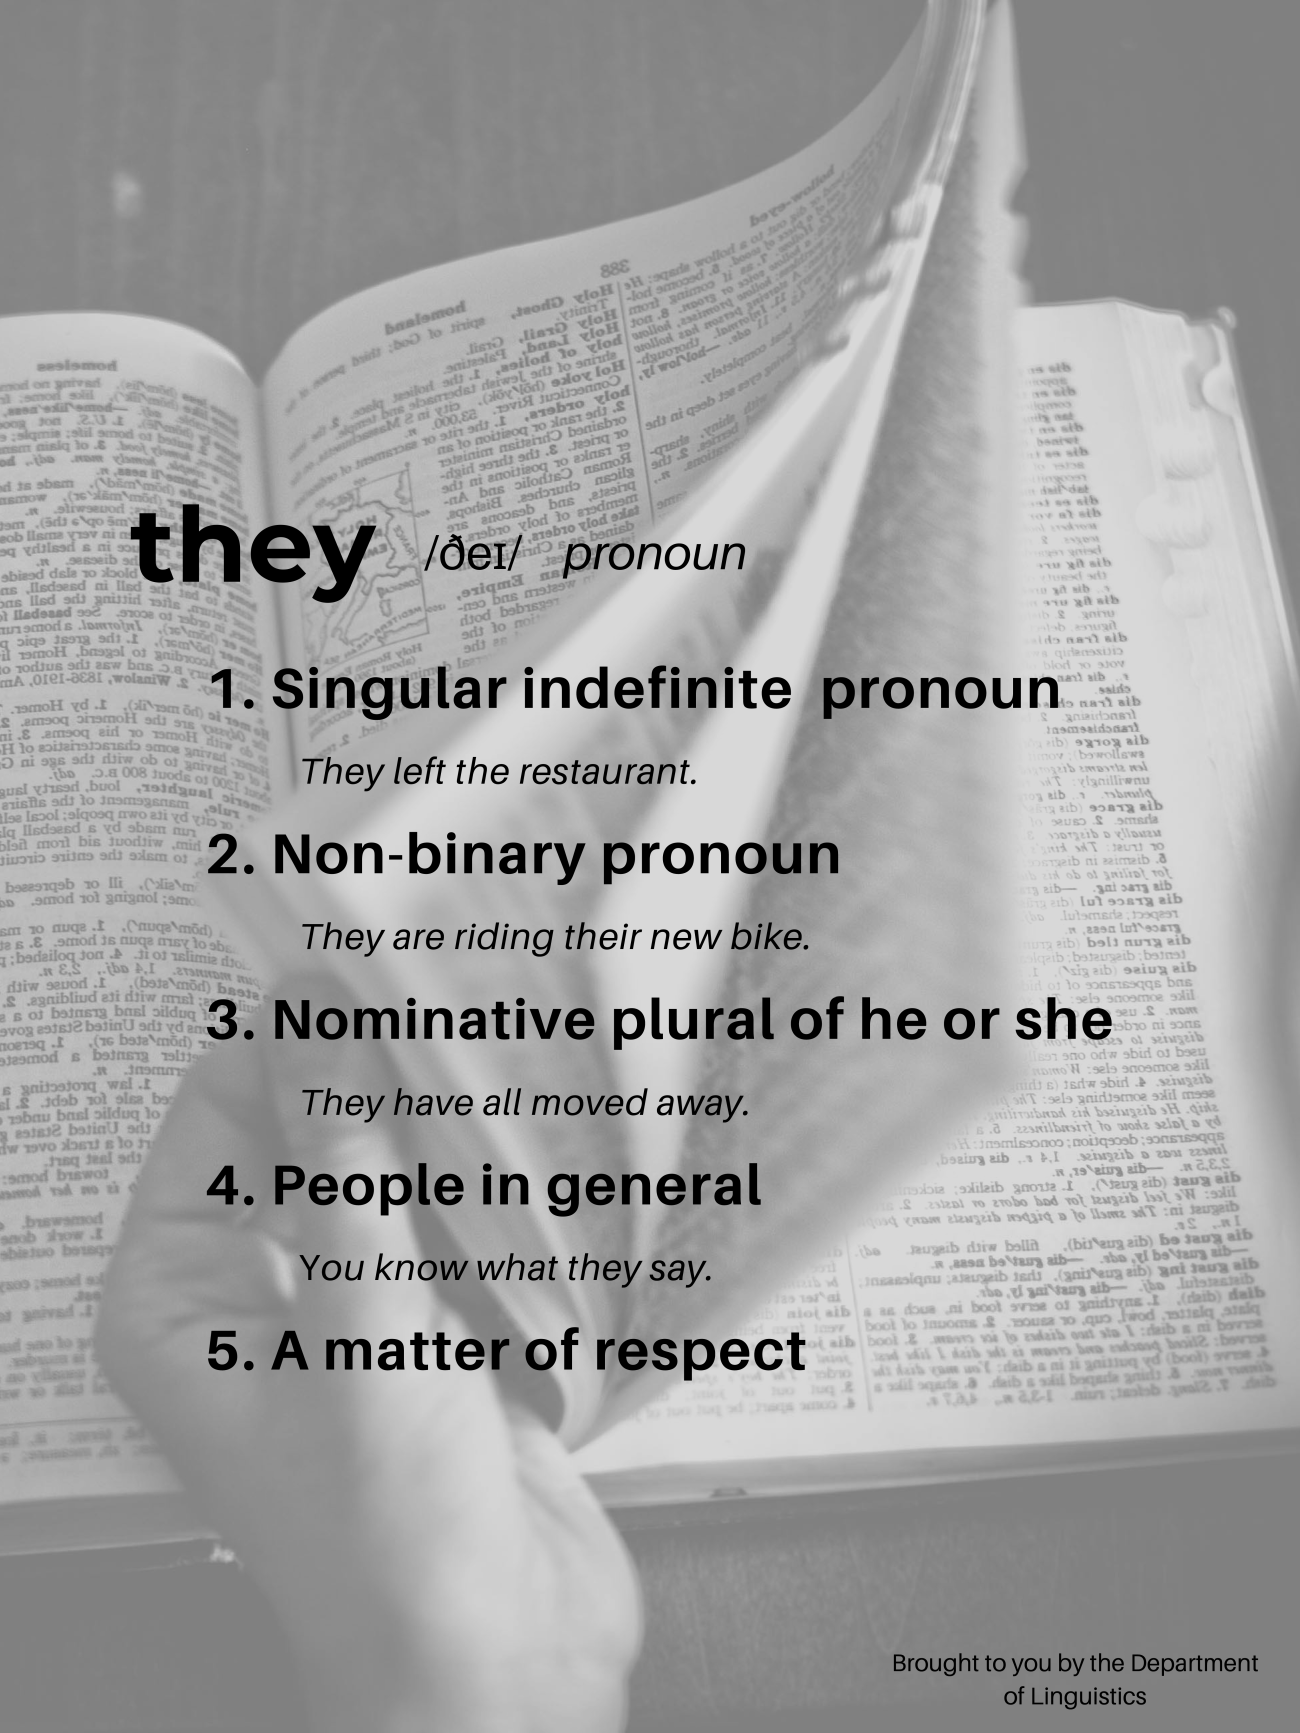 Linguistics Poster. Definition of 'they.' See website for full description.